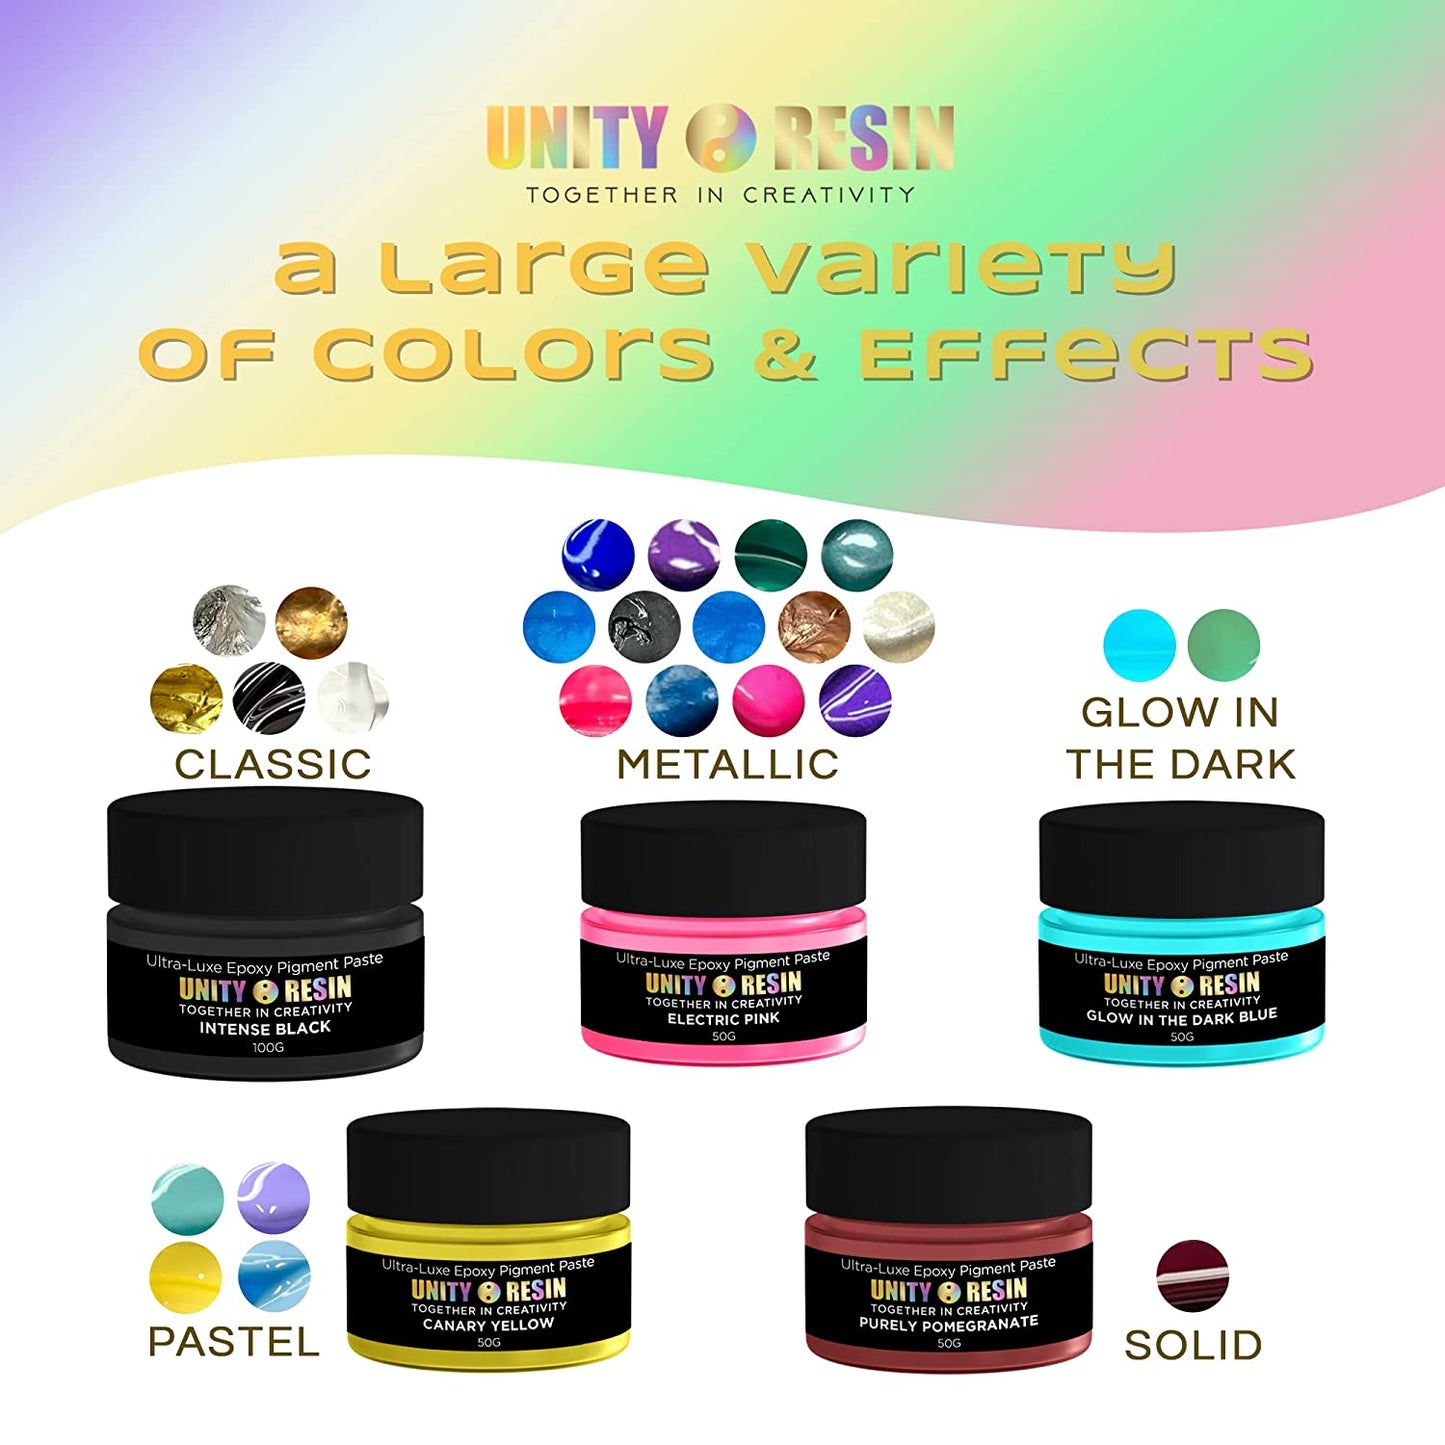 Ultra-Luxe Epoxy Resin Pigment Paste- GLOW in the DARK GREEN (50G).